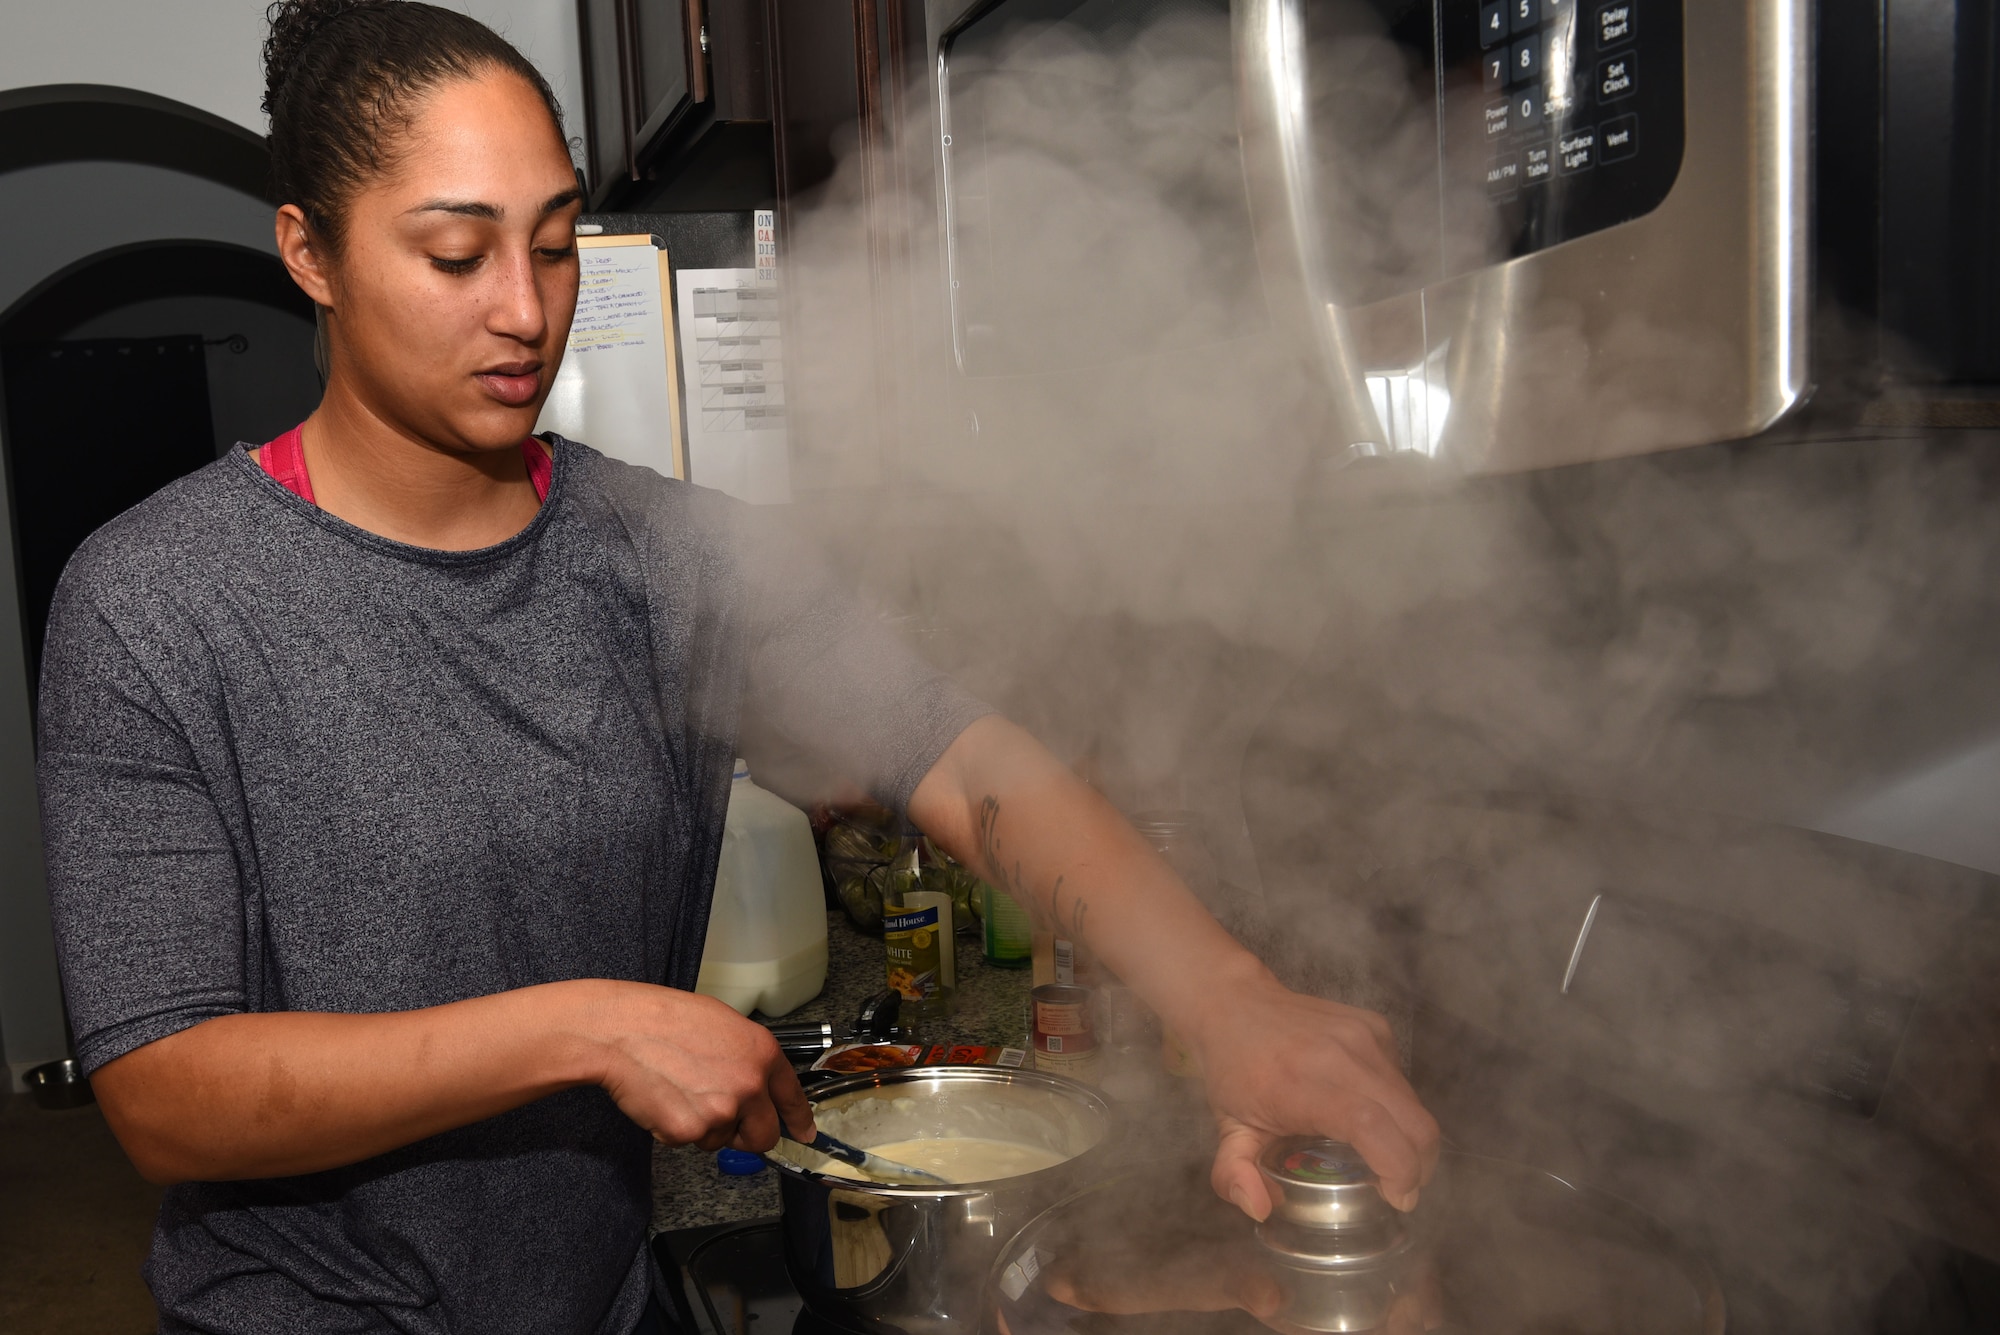 U.S. Air Force Tech. Sgt. Ashley Grugin, 20th Aircraft Maintenance Squadron unit fitness program manager, prepares a meal at her residence in Sumter, S.C., Dec. 16, 2018.